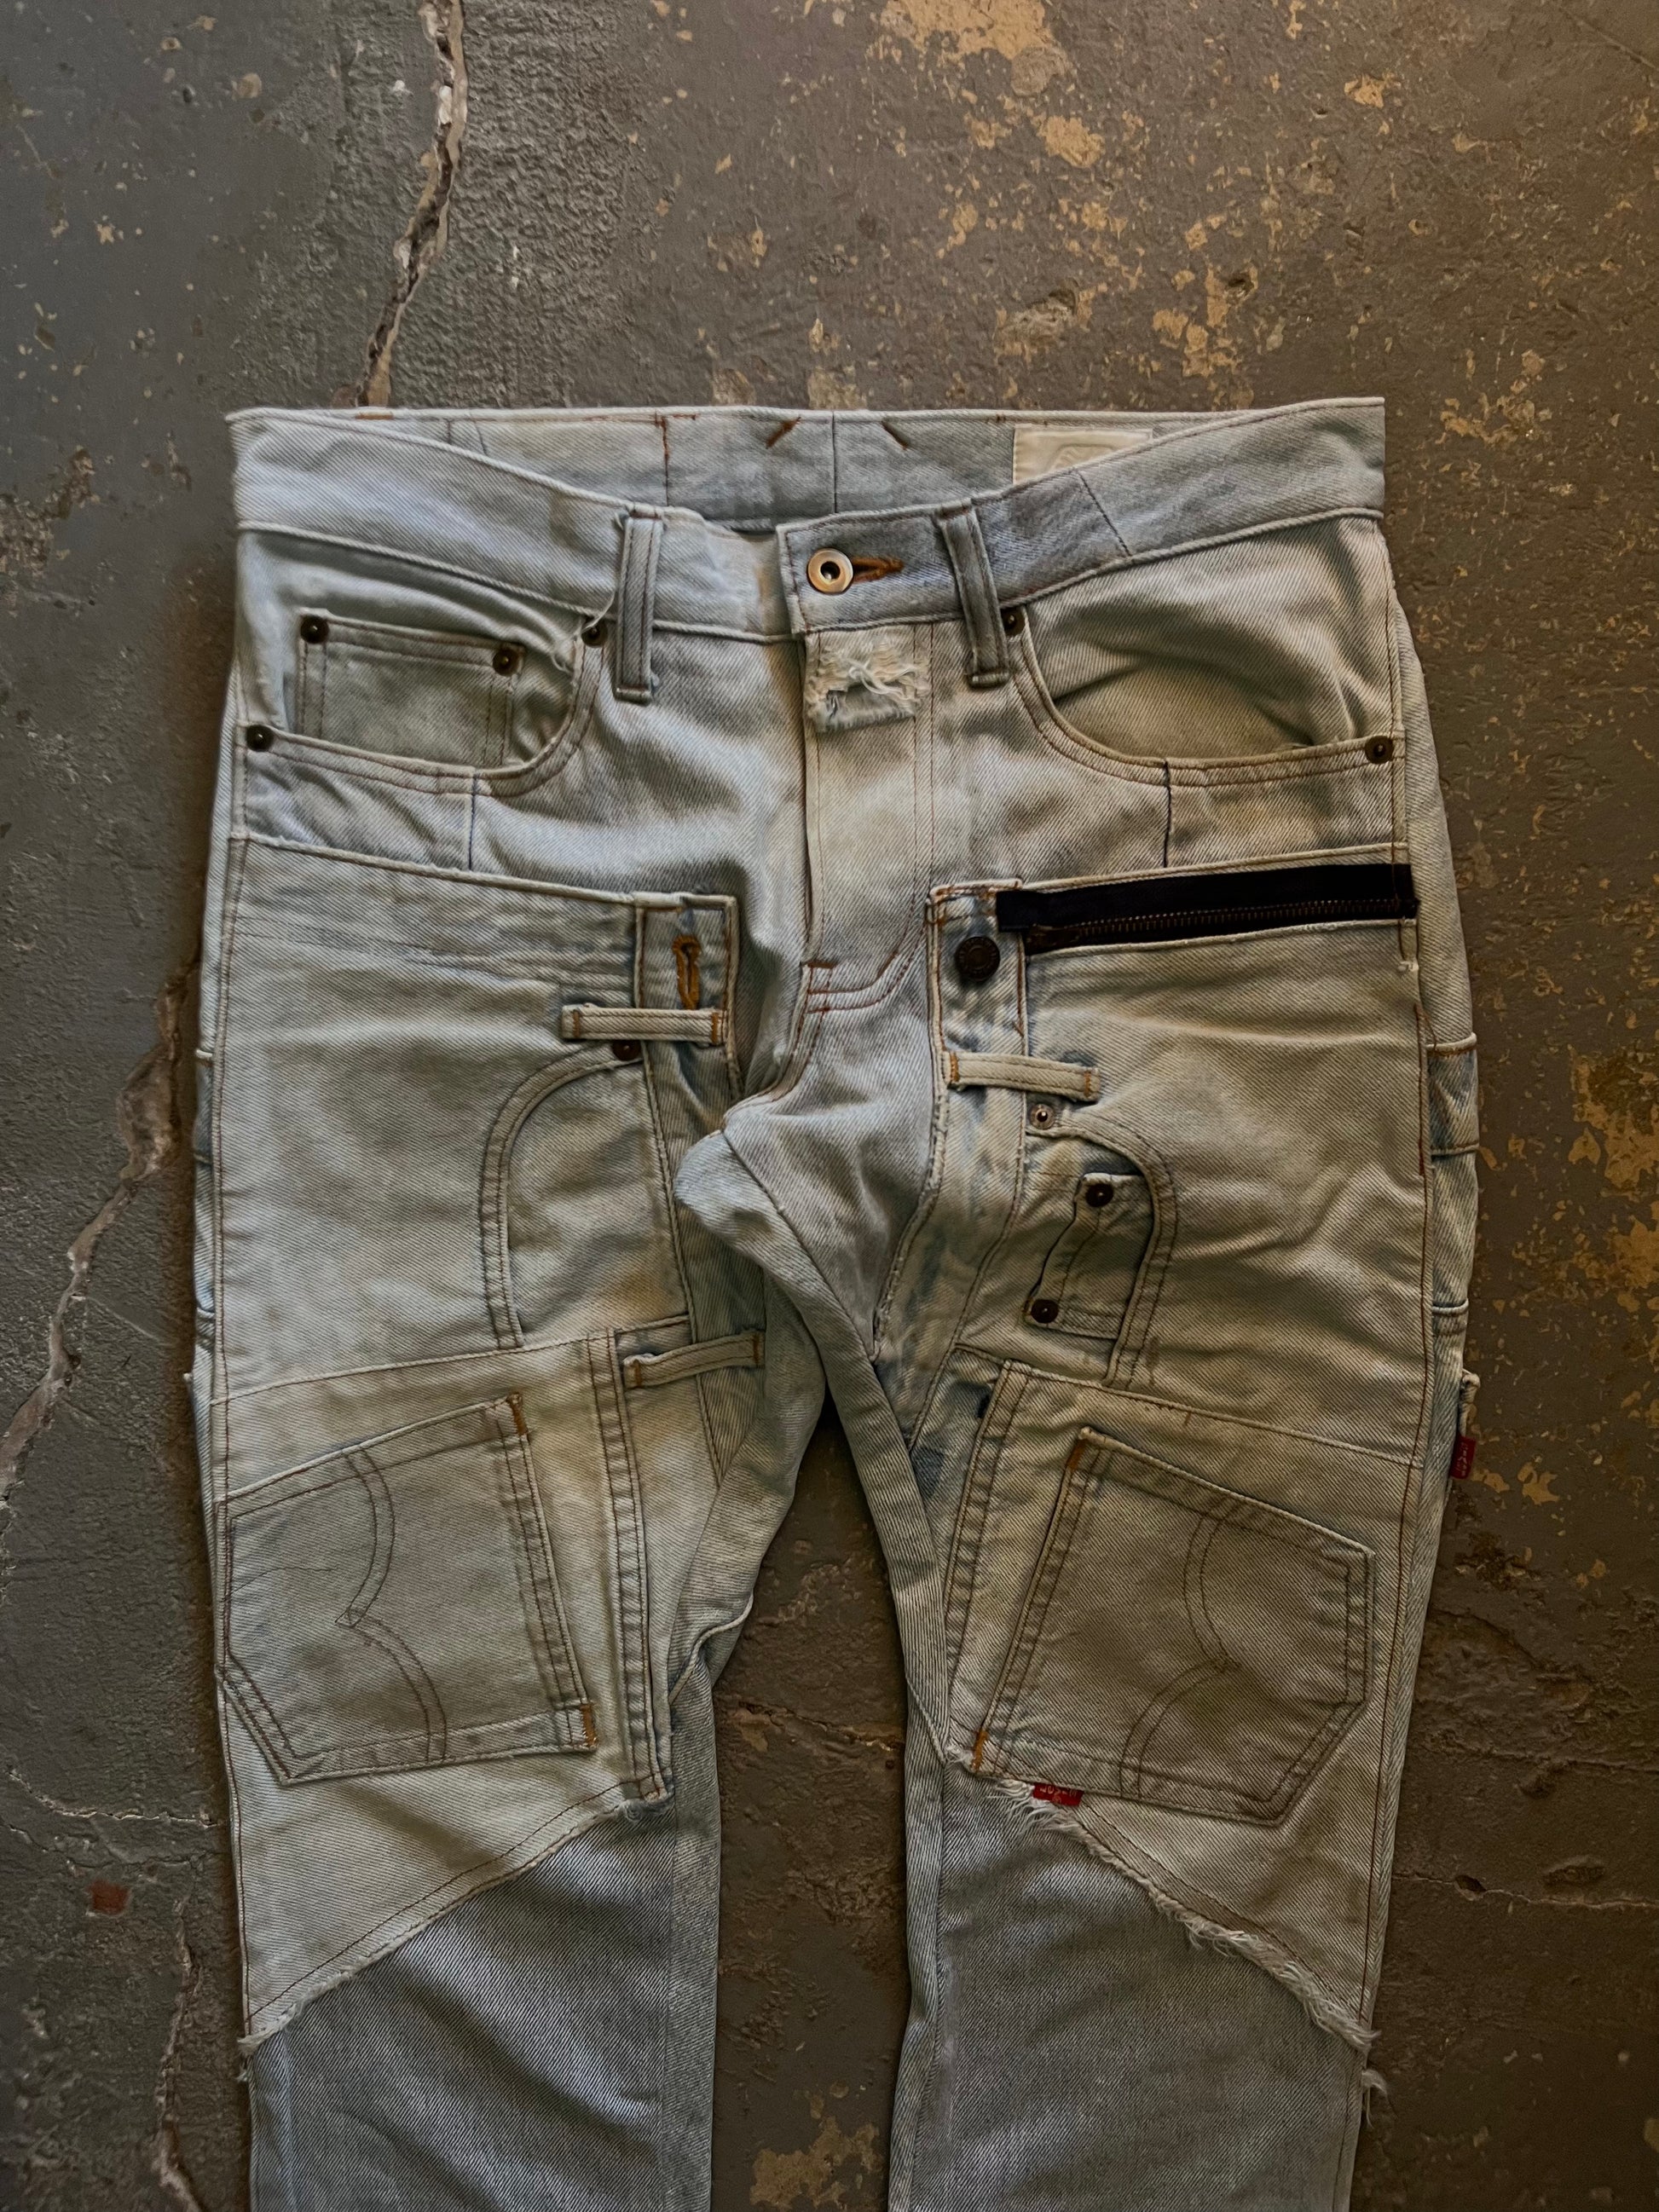 20471120 Paper AW00 “Recycounture” Reconstructed Levi's Jeans 